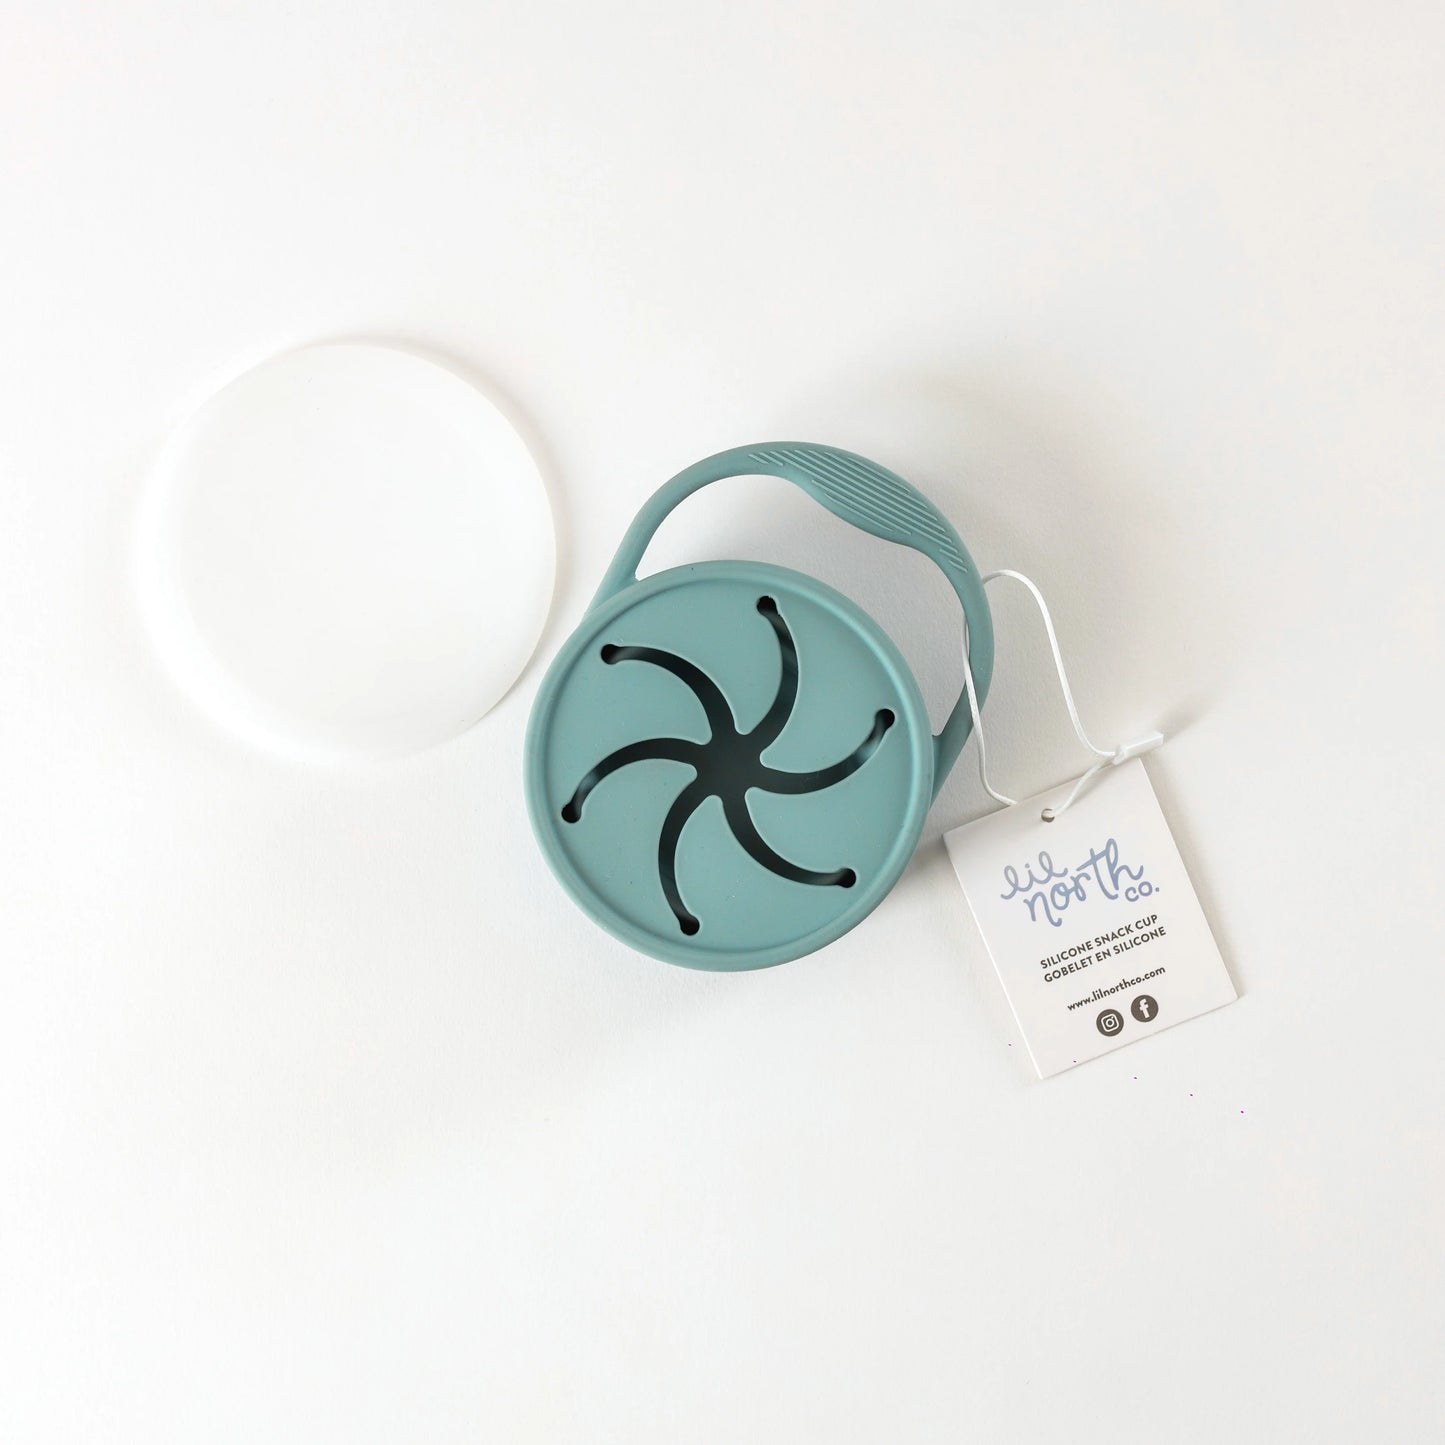 Lidded Silicone Snack Cup - Pale Blue